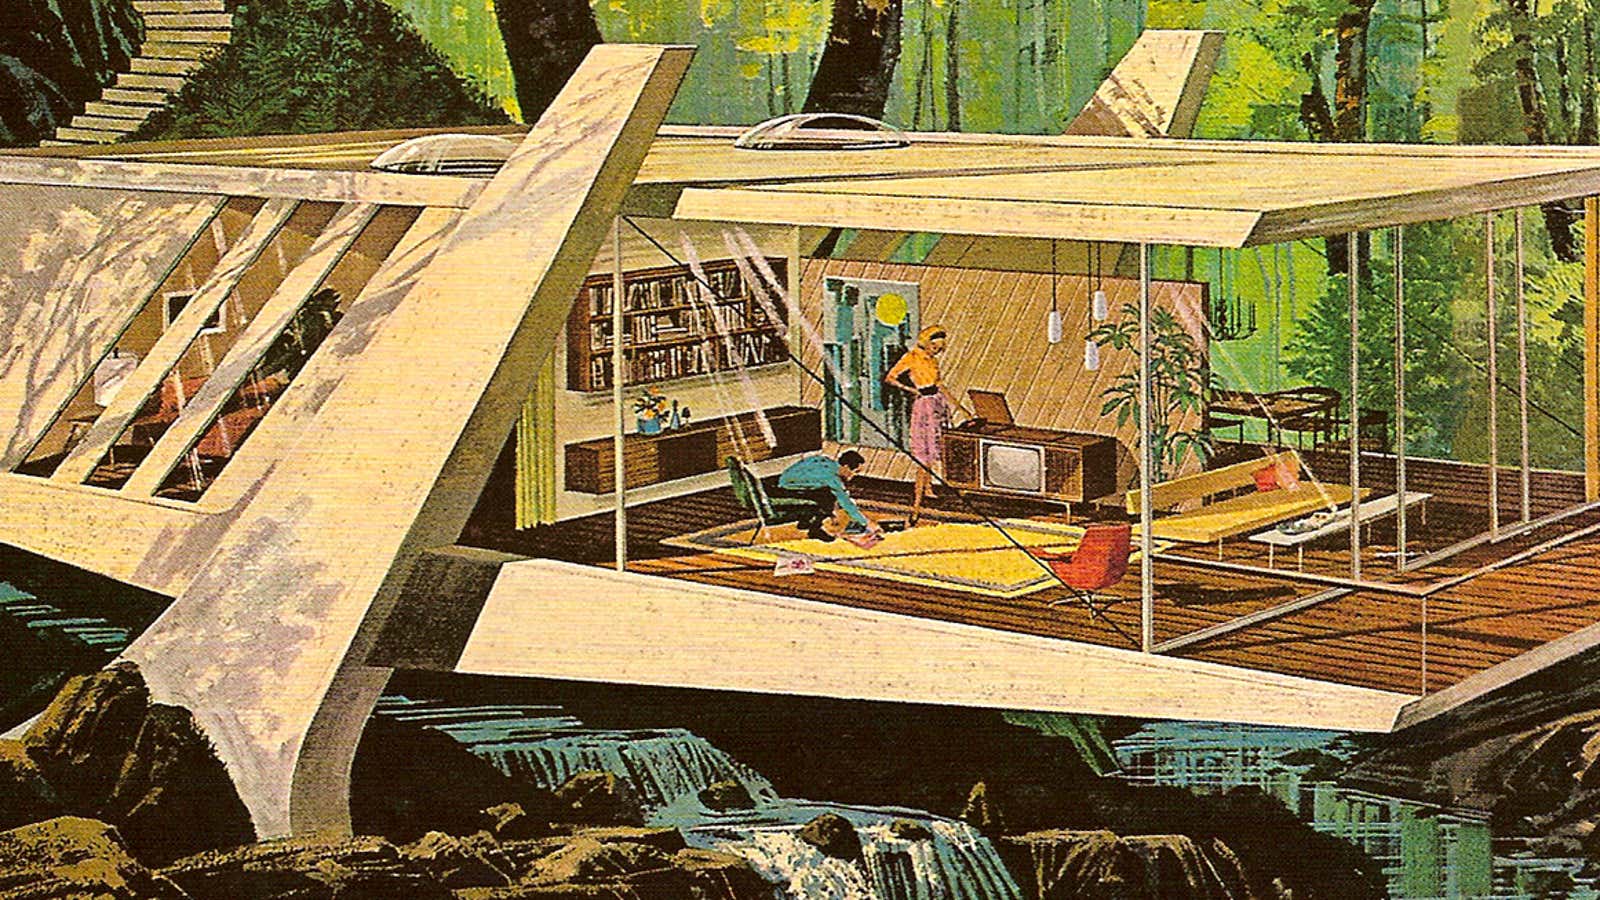 The Home of Tomorrow.